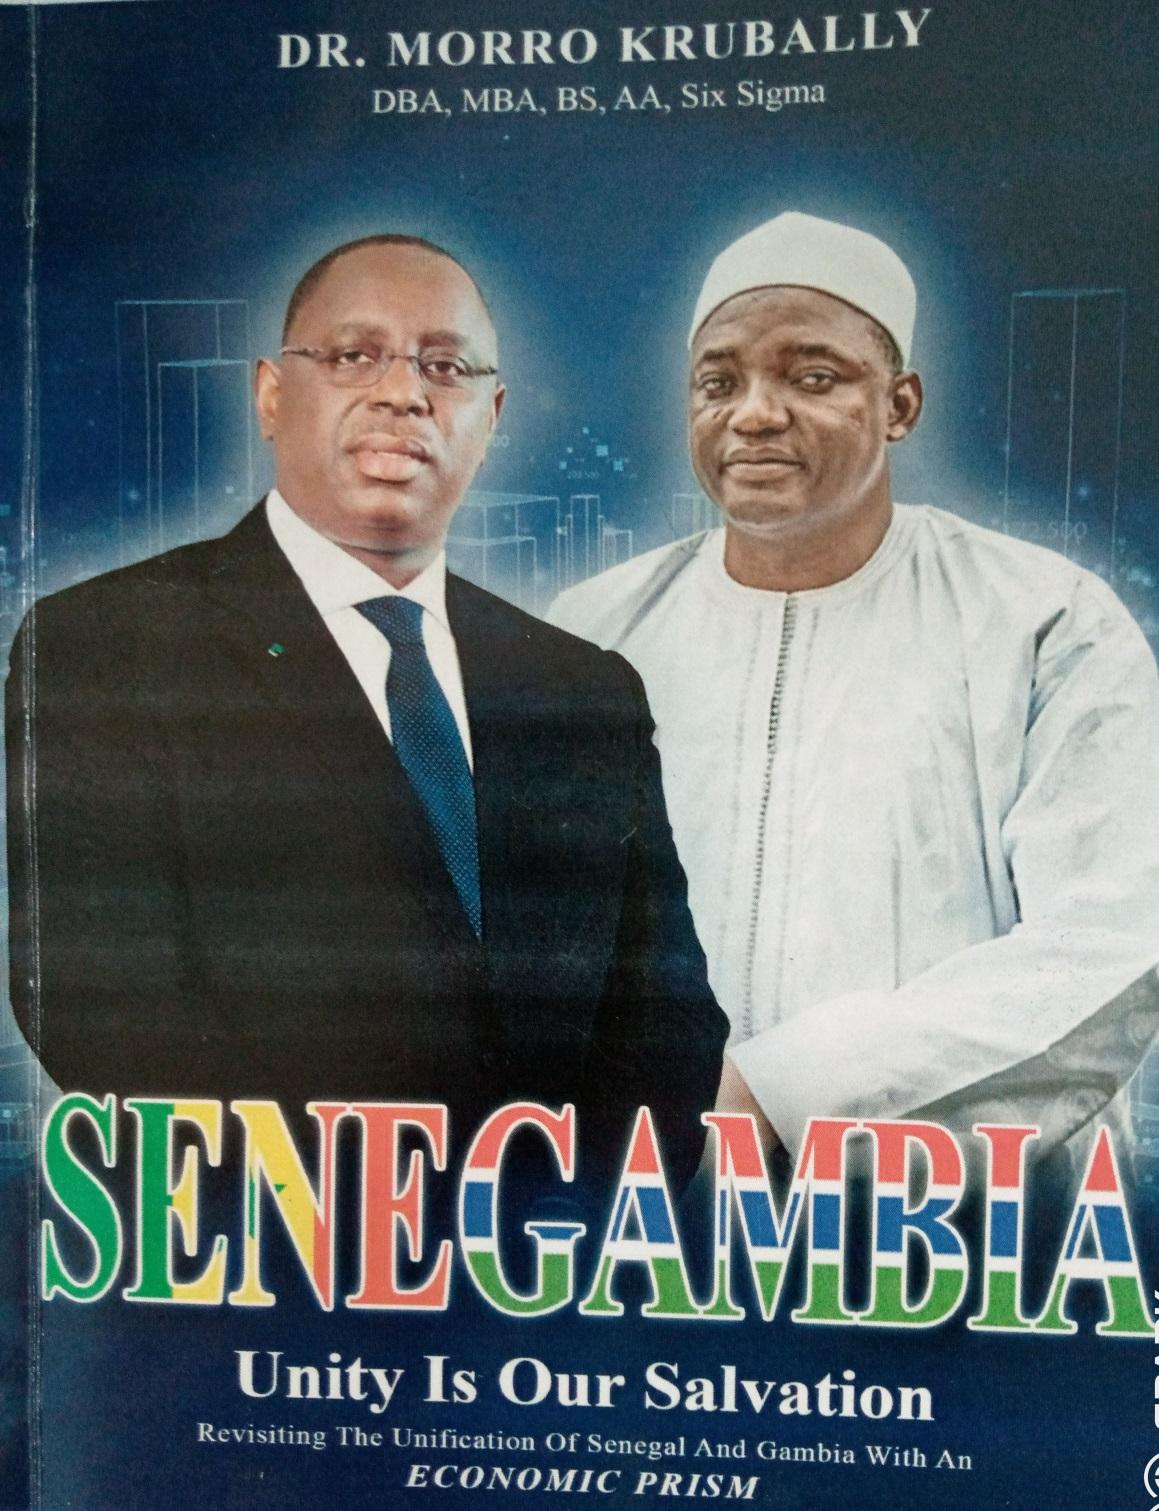 Author’s book dilates on revisiting the unification of Senegal and Gambia with economic prism